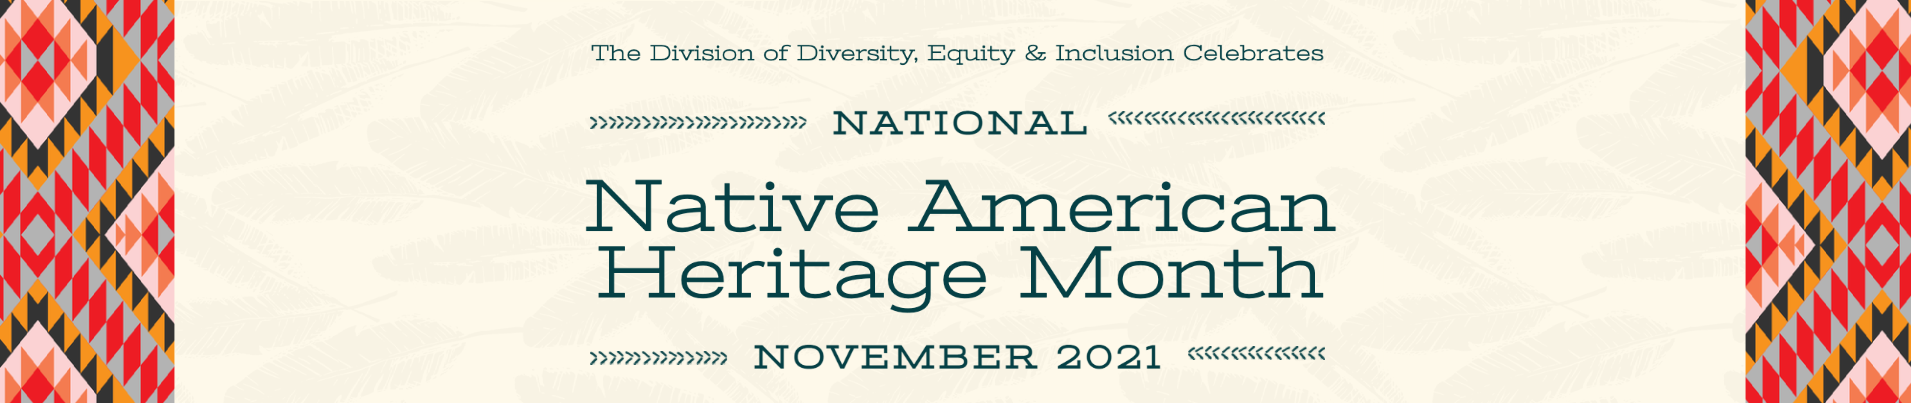 2021 Native American Heritage Month